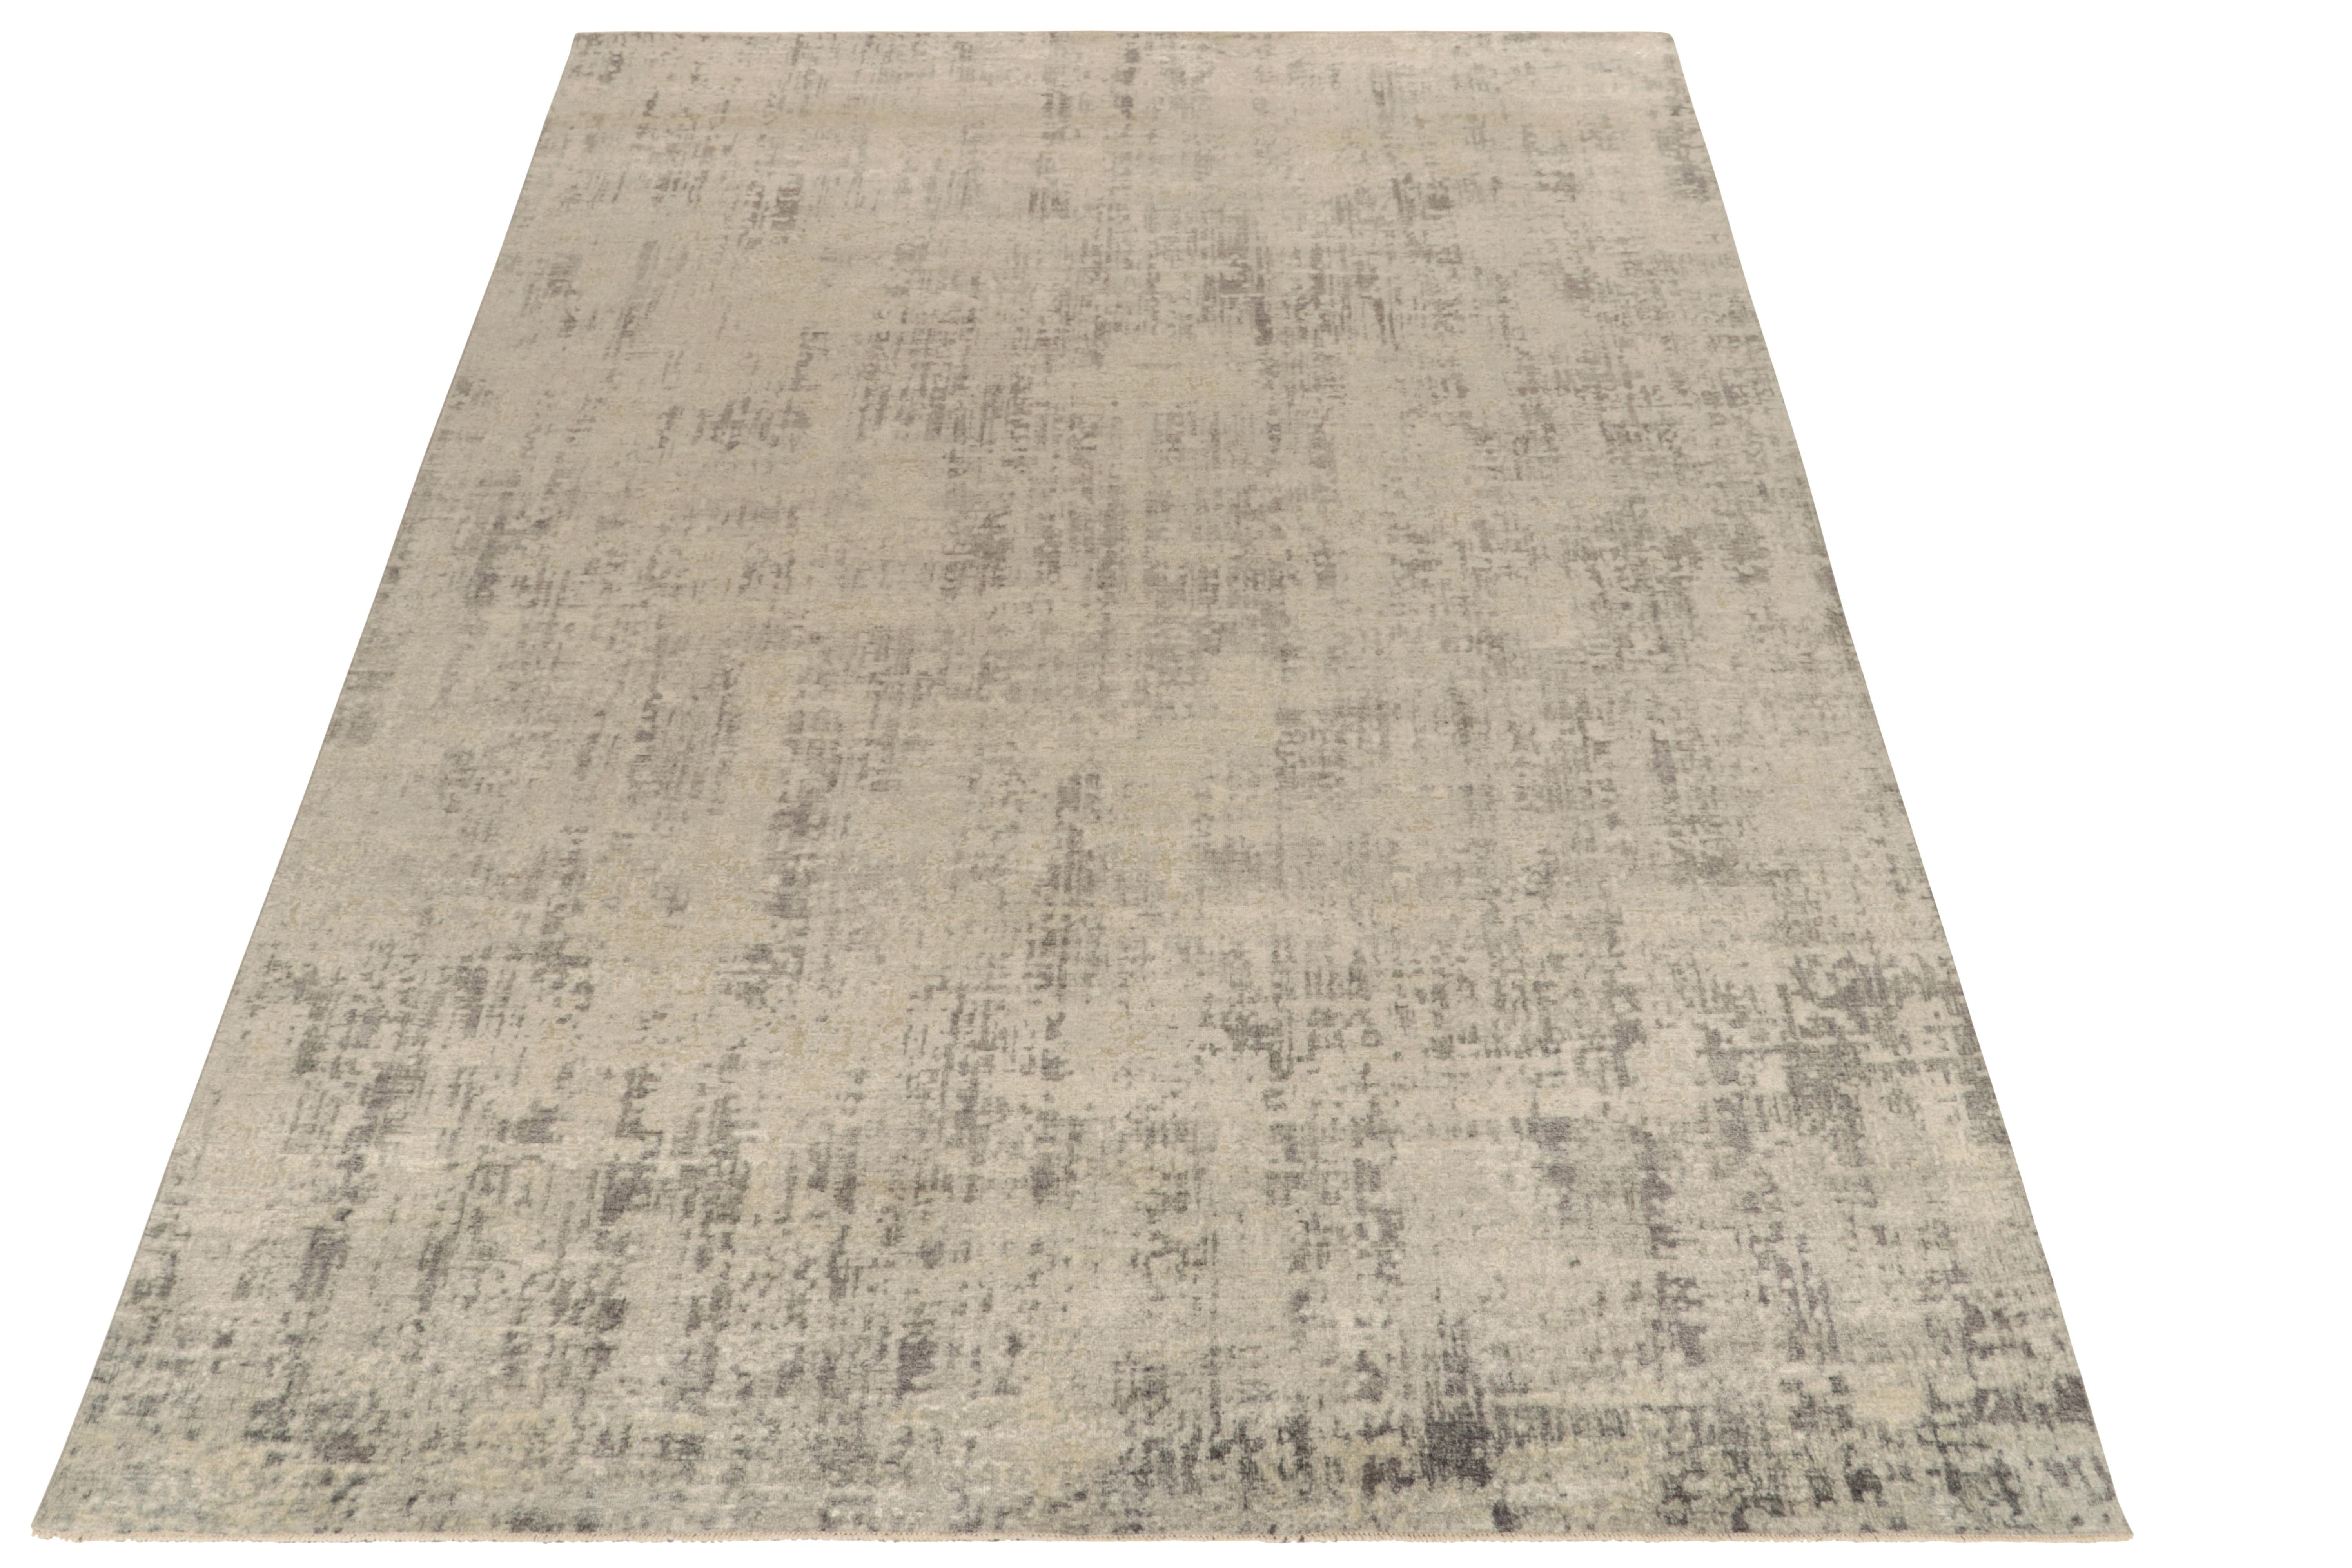 This 9×12 abstract rug is a bold new addition to Rug & Kilim’s Modern Collection. Hand-knotted in wool and silk, it enjoys finely detailed greige and taupe striae in its all over pattern.

Keen eyes may further admire the meticulous detail in its